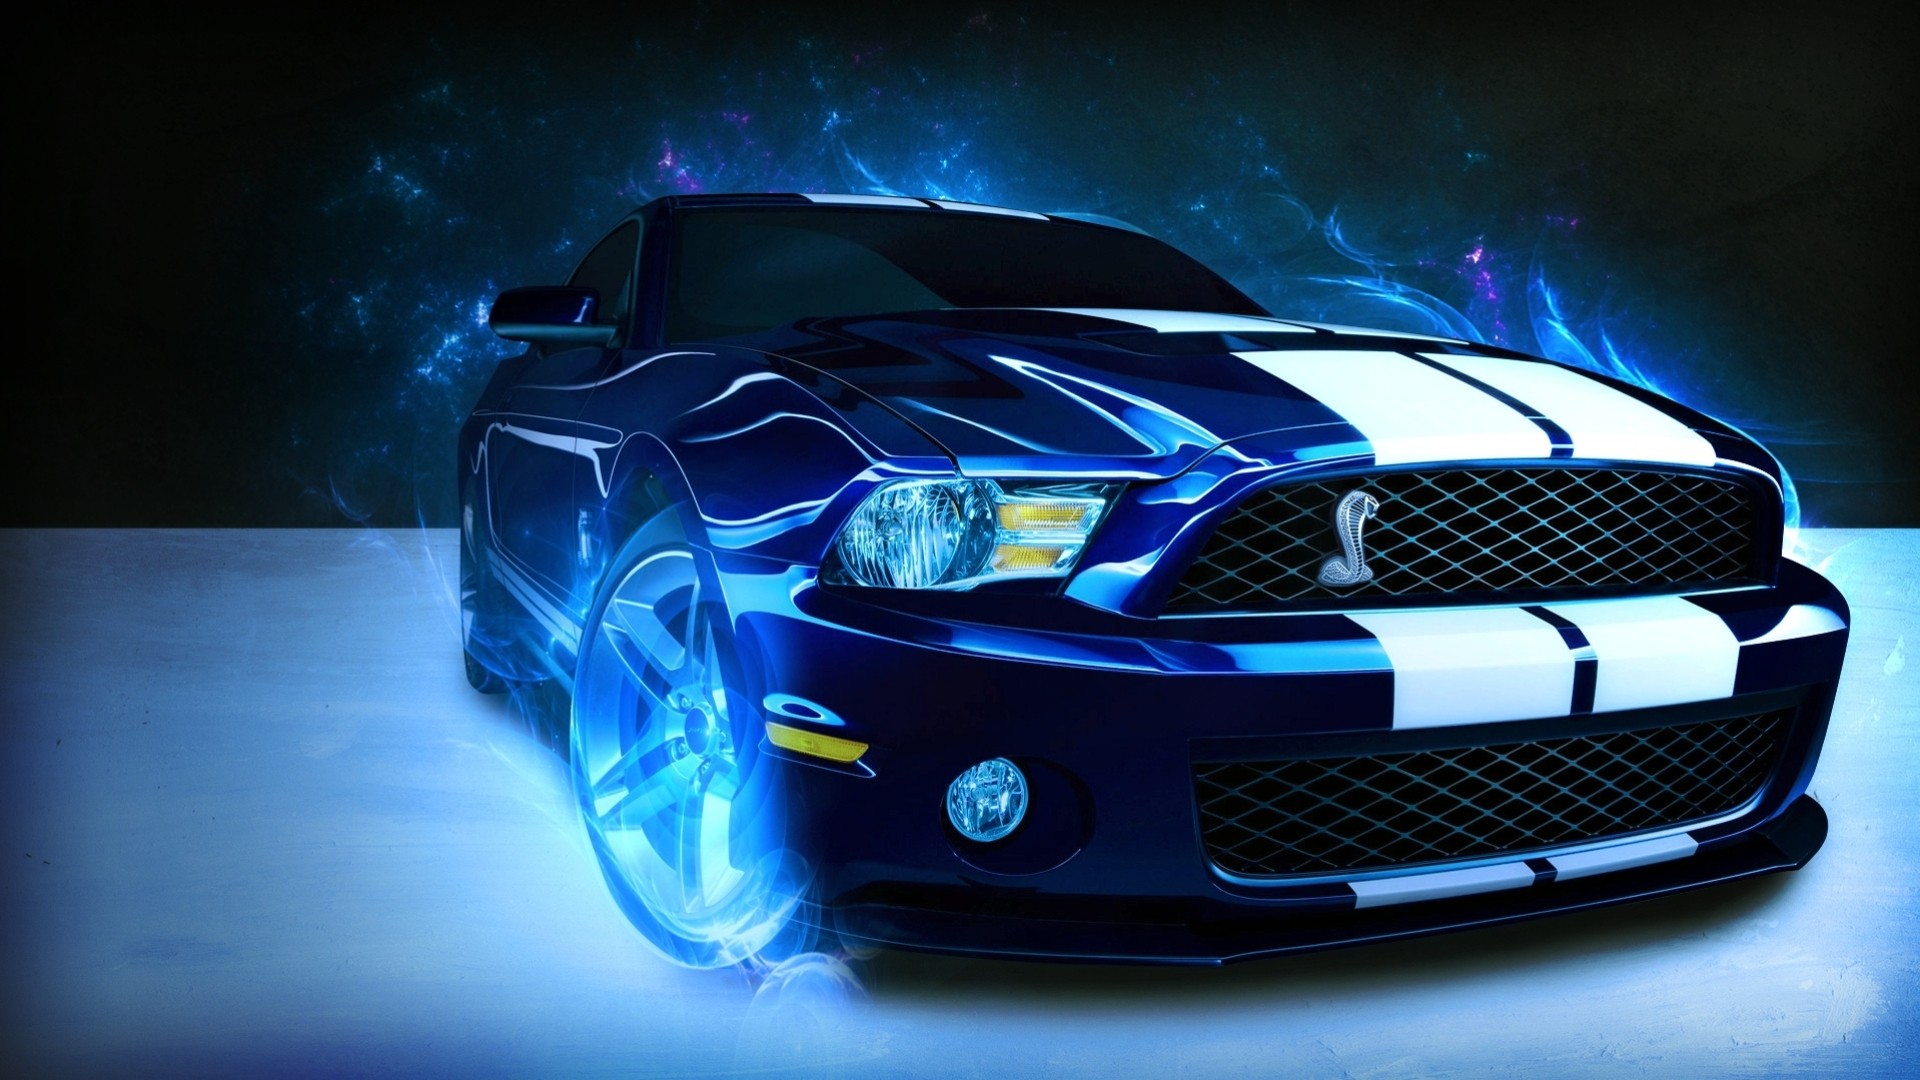 Cool cars backgrounds